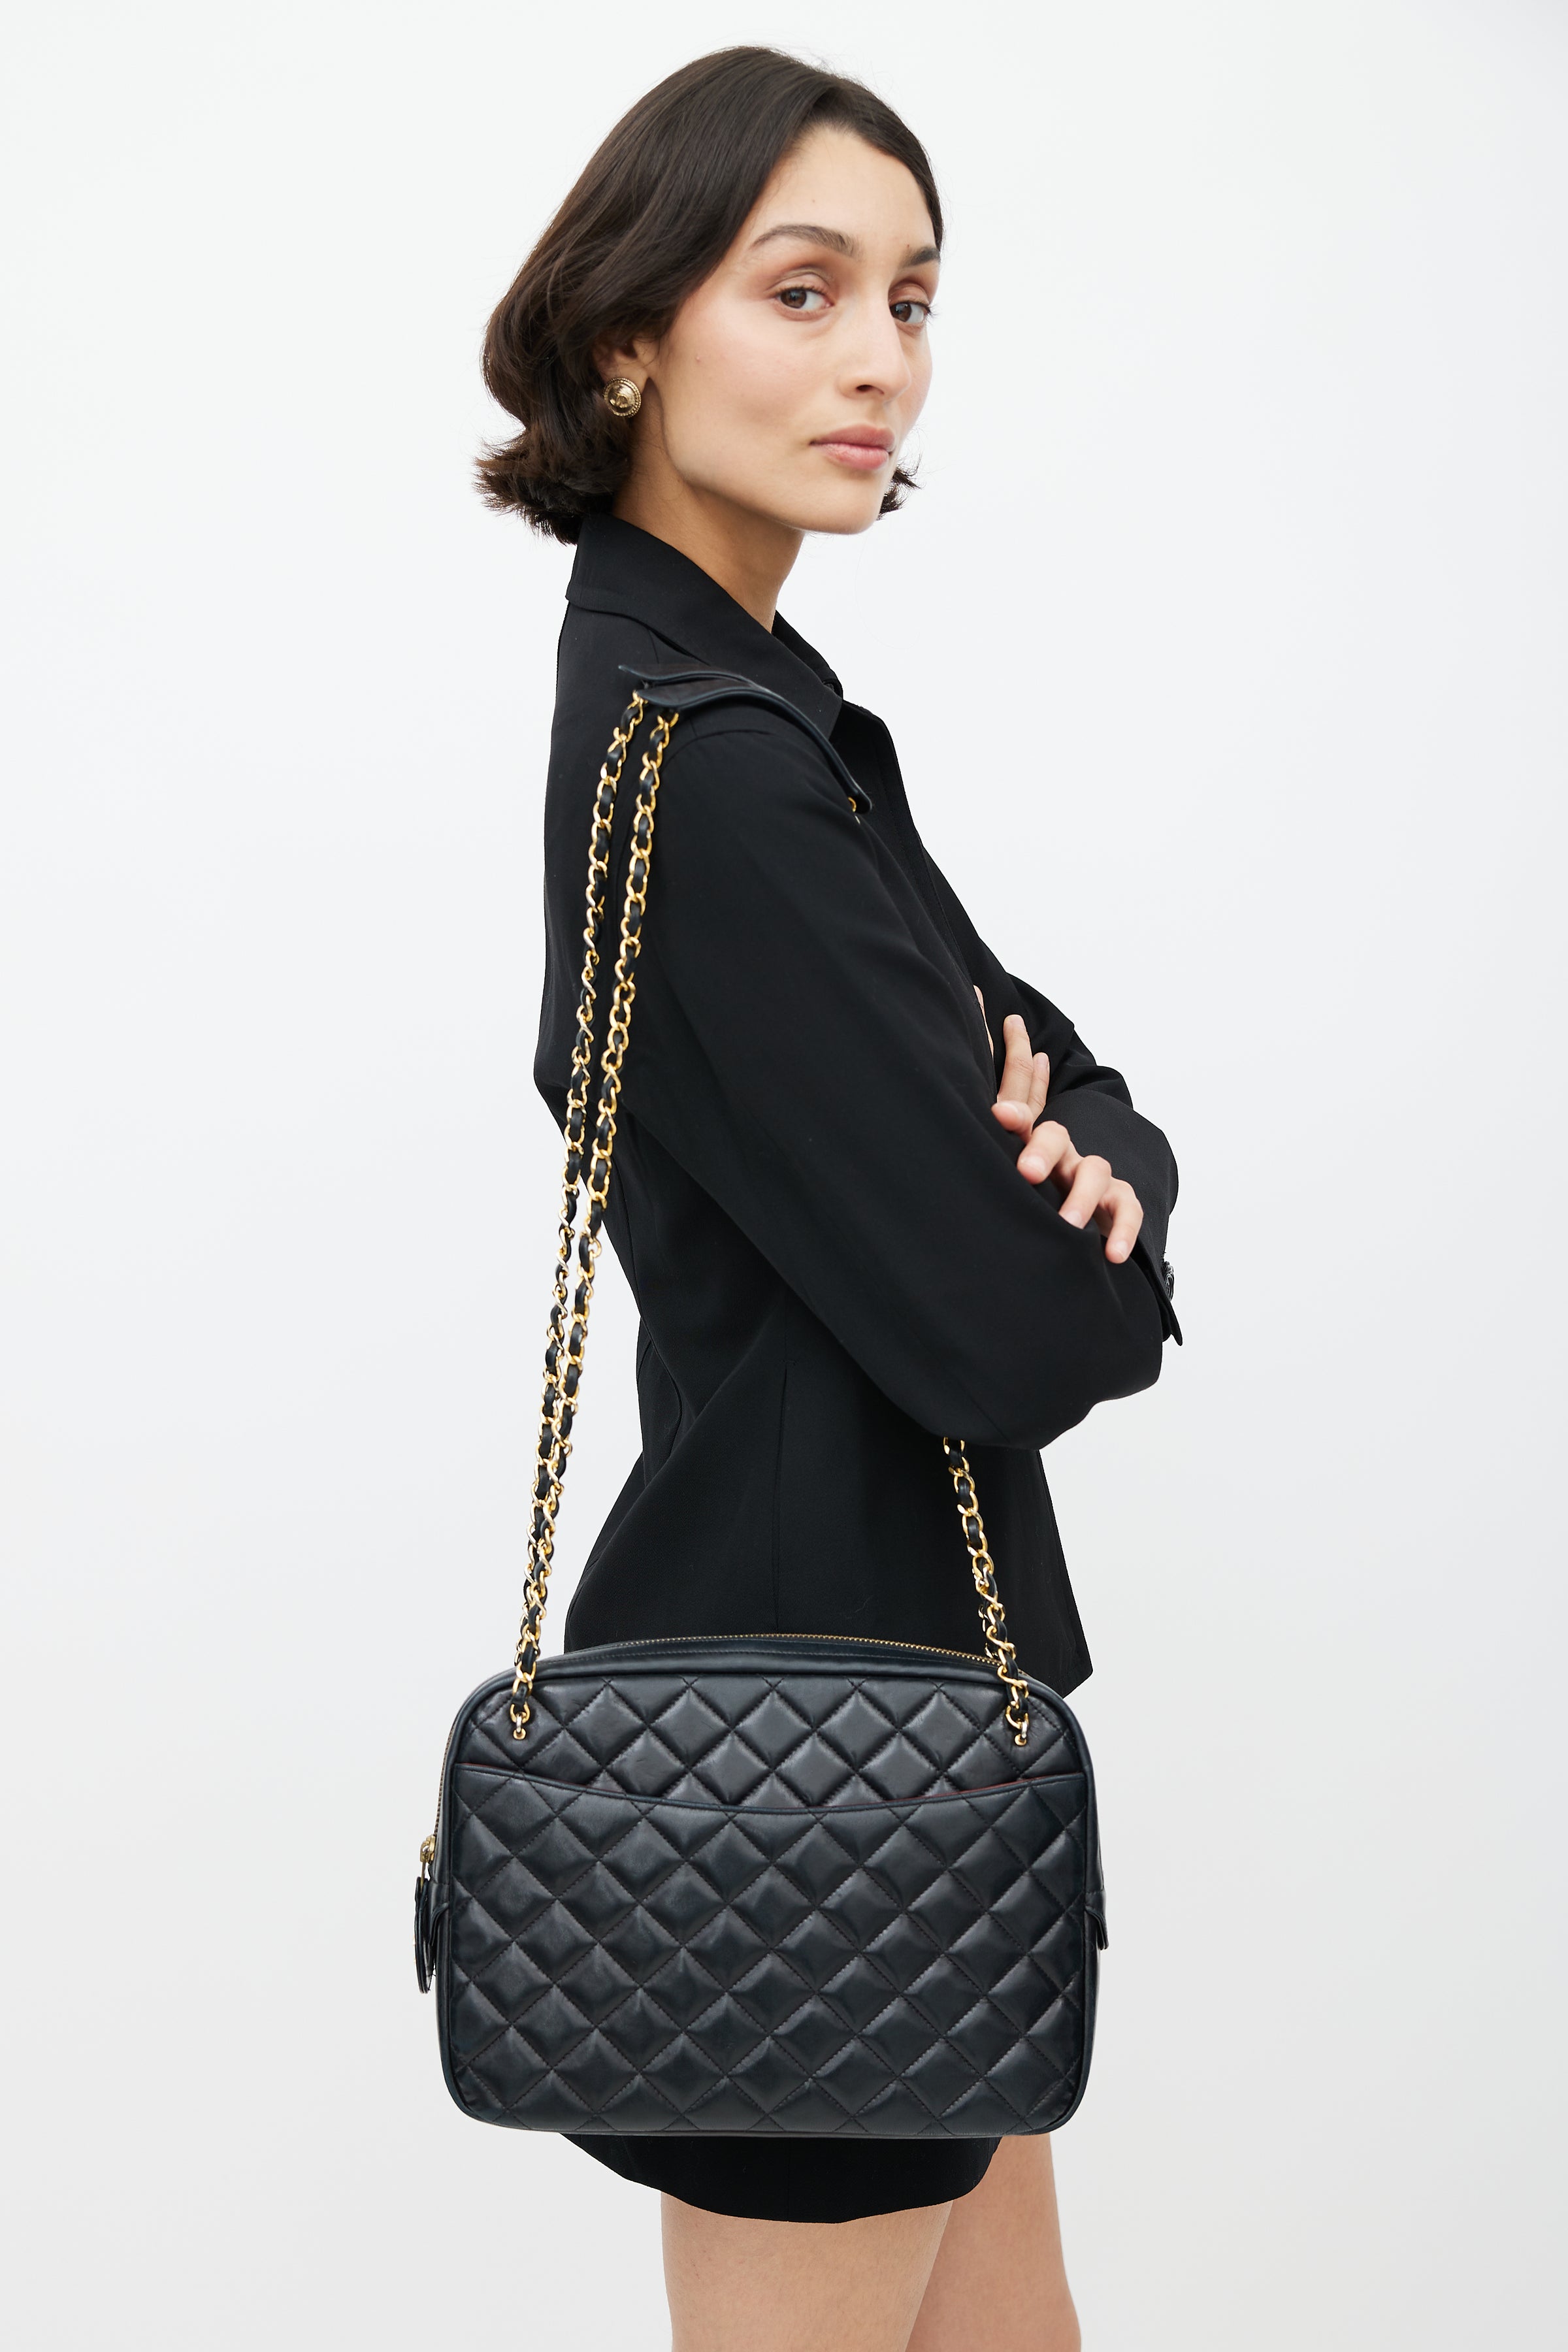 CHANEL Caviar Quilted Camera Bag Black | FASHIONPHILE